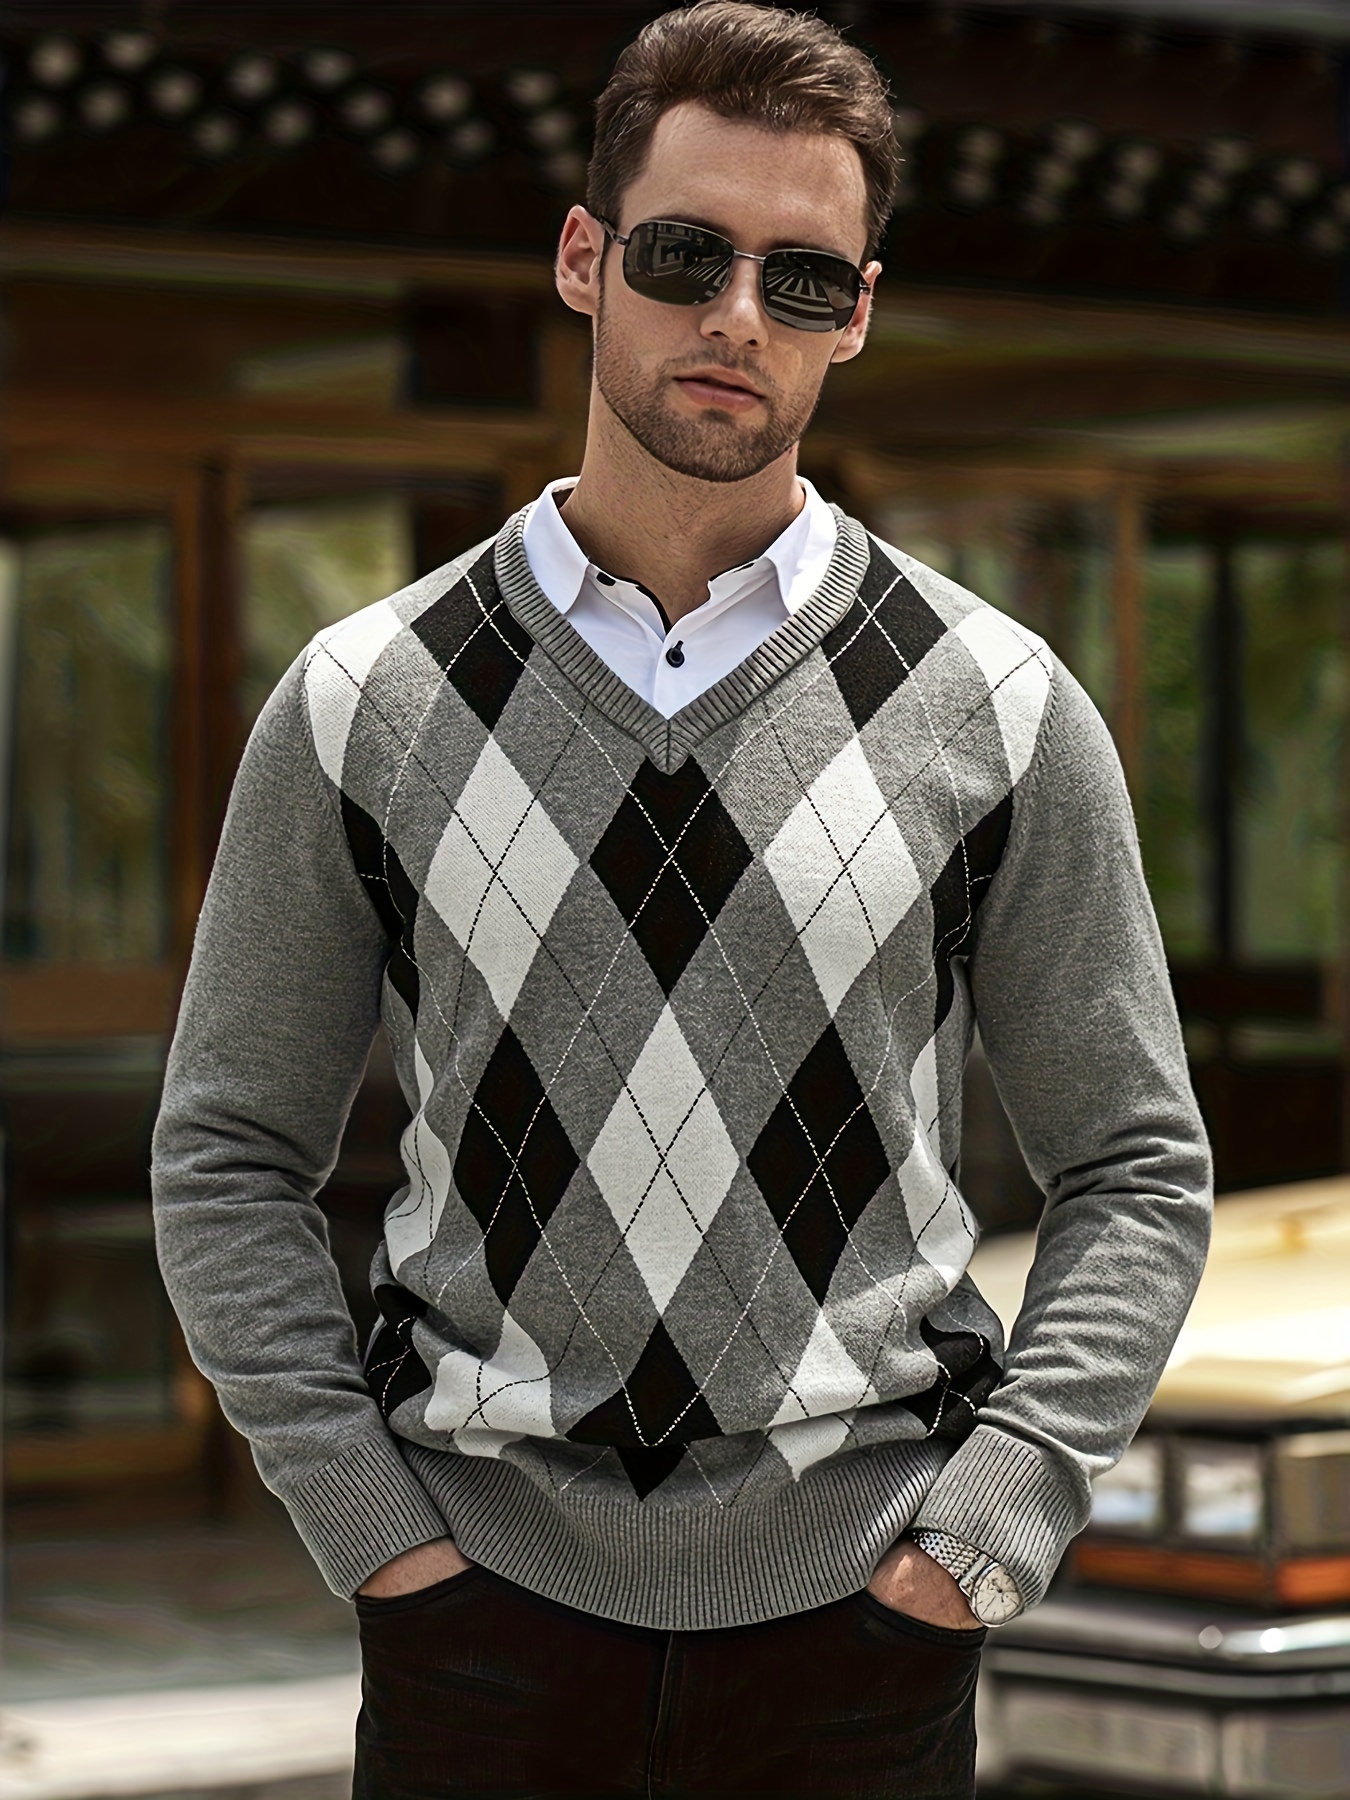 Men's Slim Fit Sweater Vest Pullover Sleeveless Sweaters Cable Knitted  V-Neck